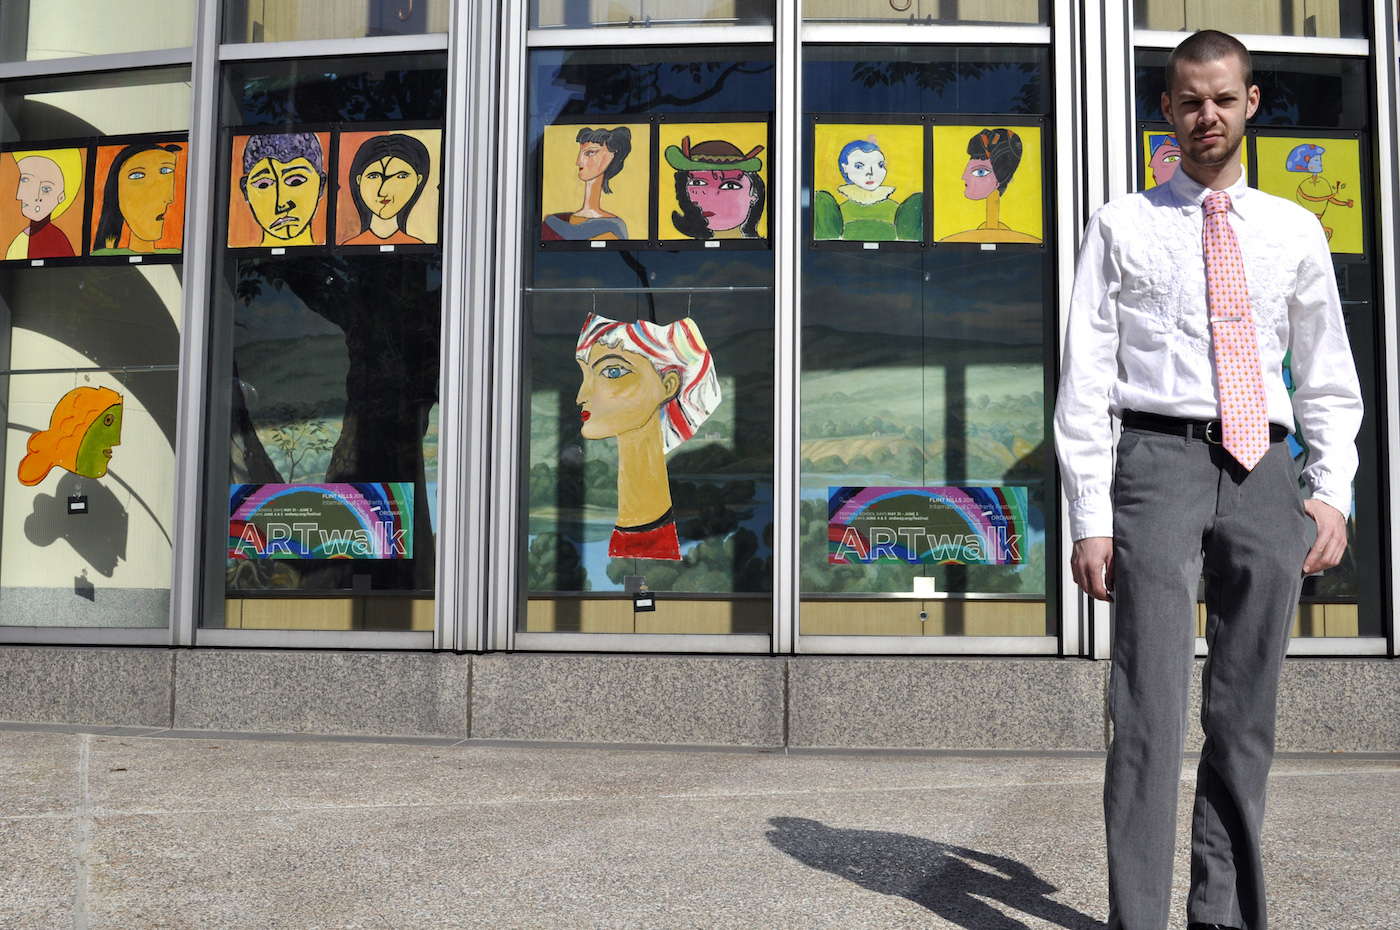 Man standing in front of window display of colorful portraits